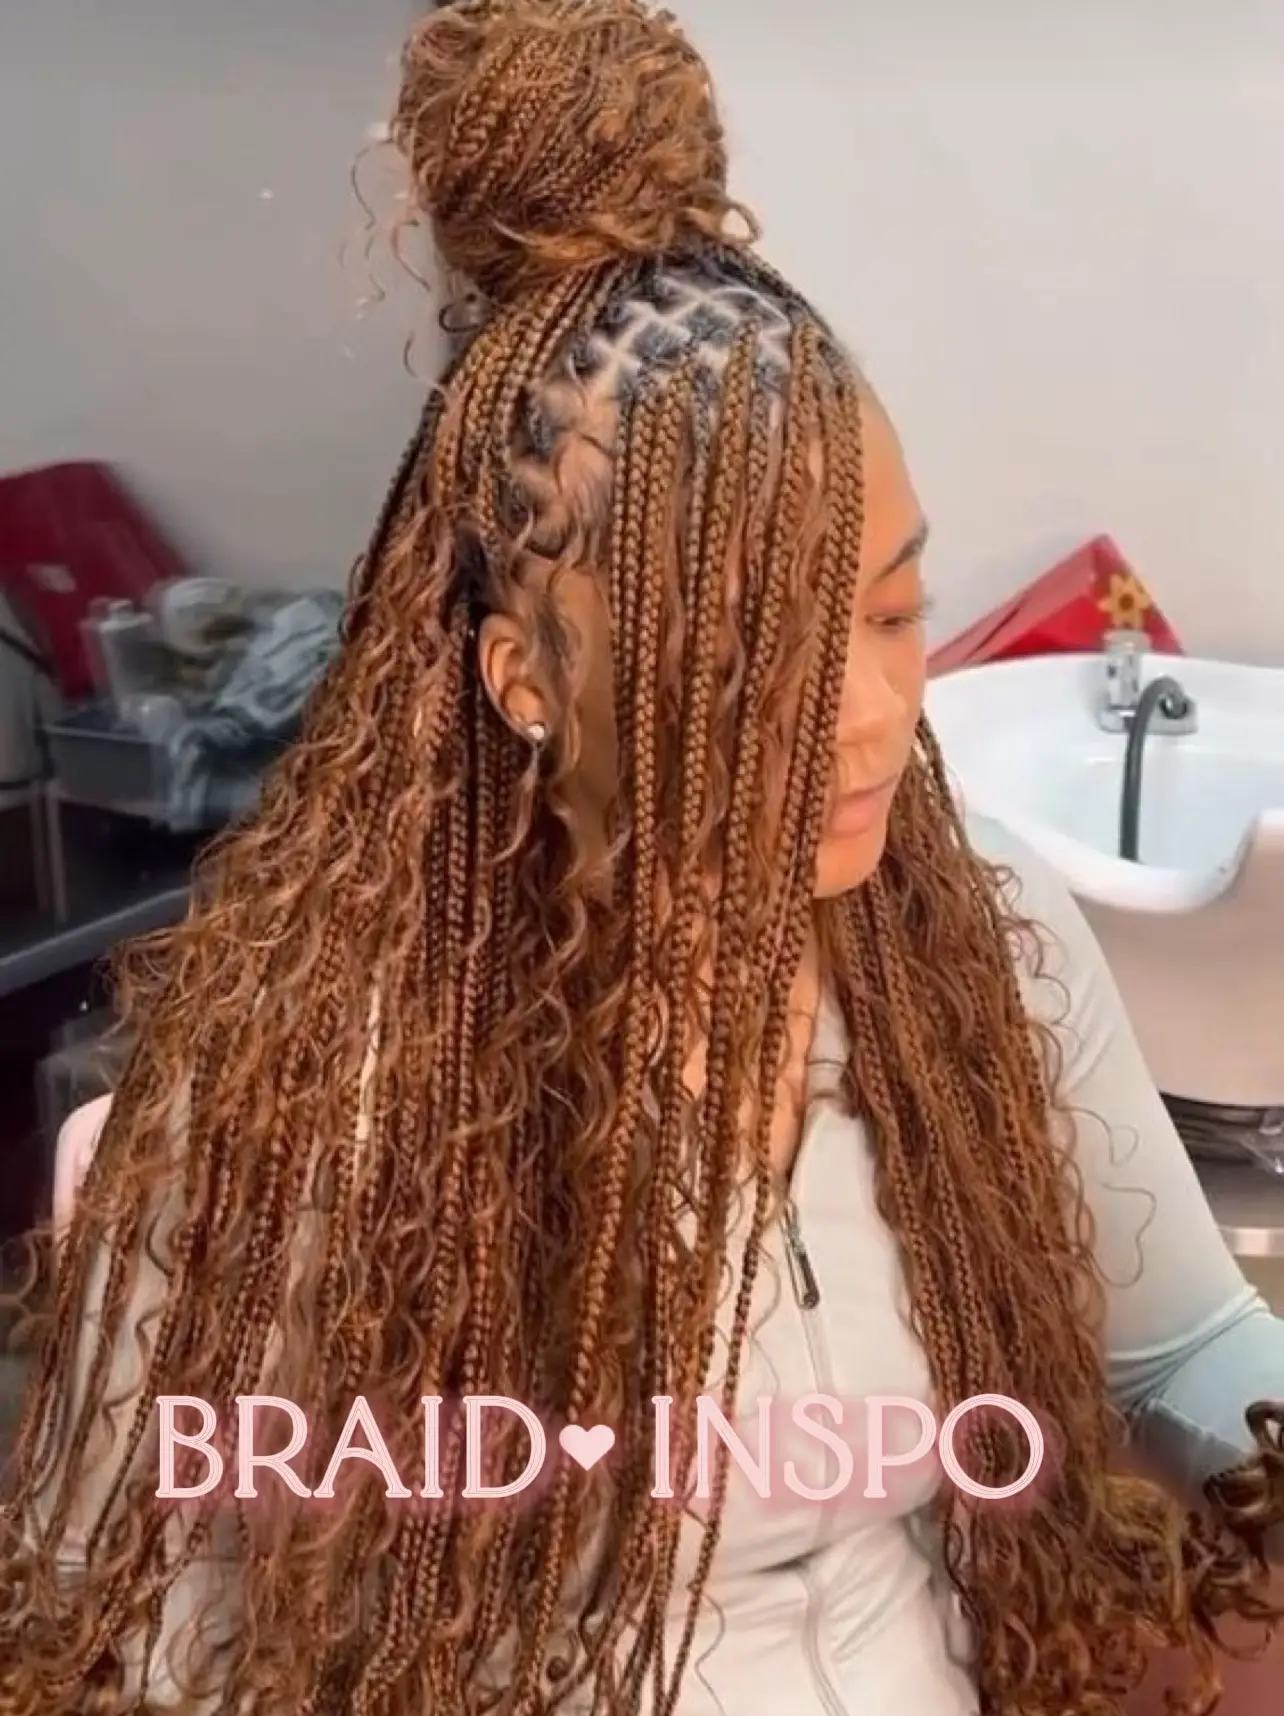 What's The Difference Between Boho Braid And Goddess Braid?